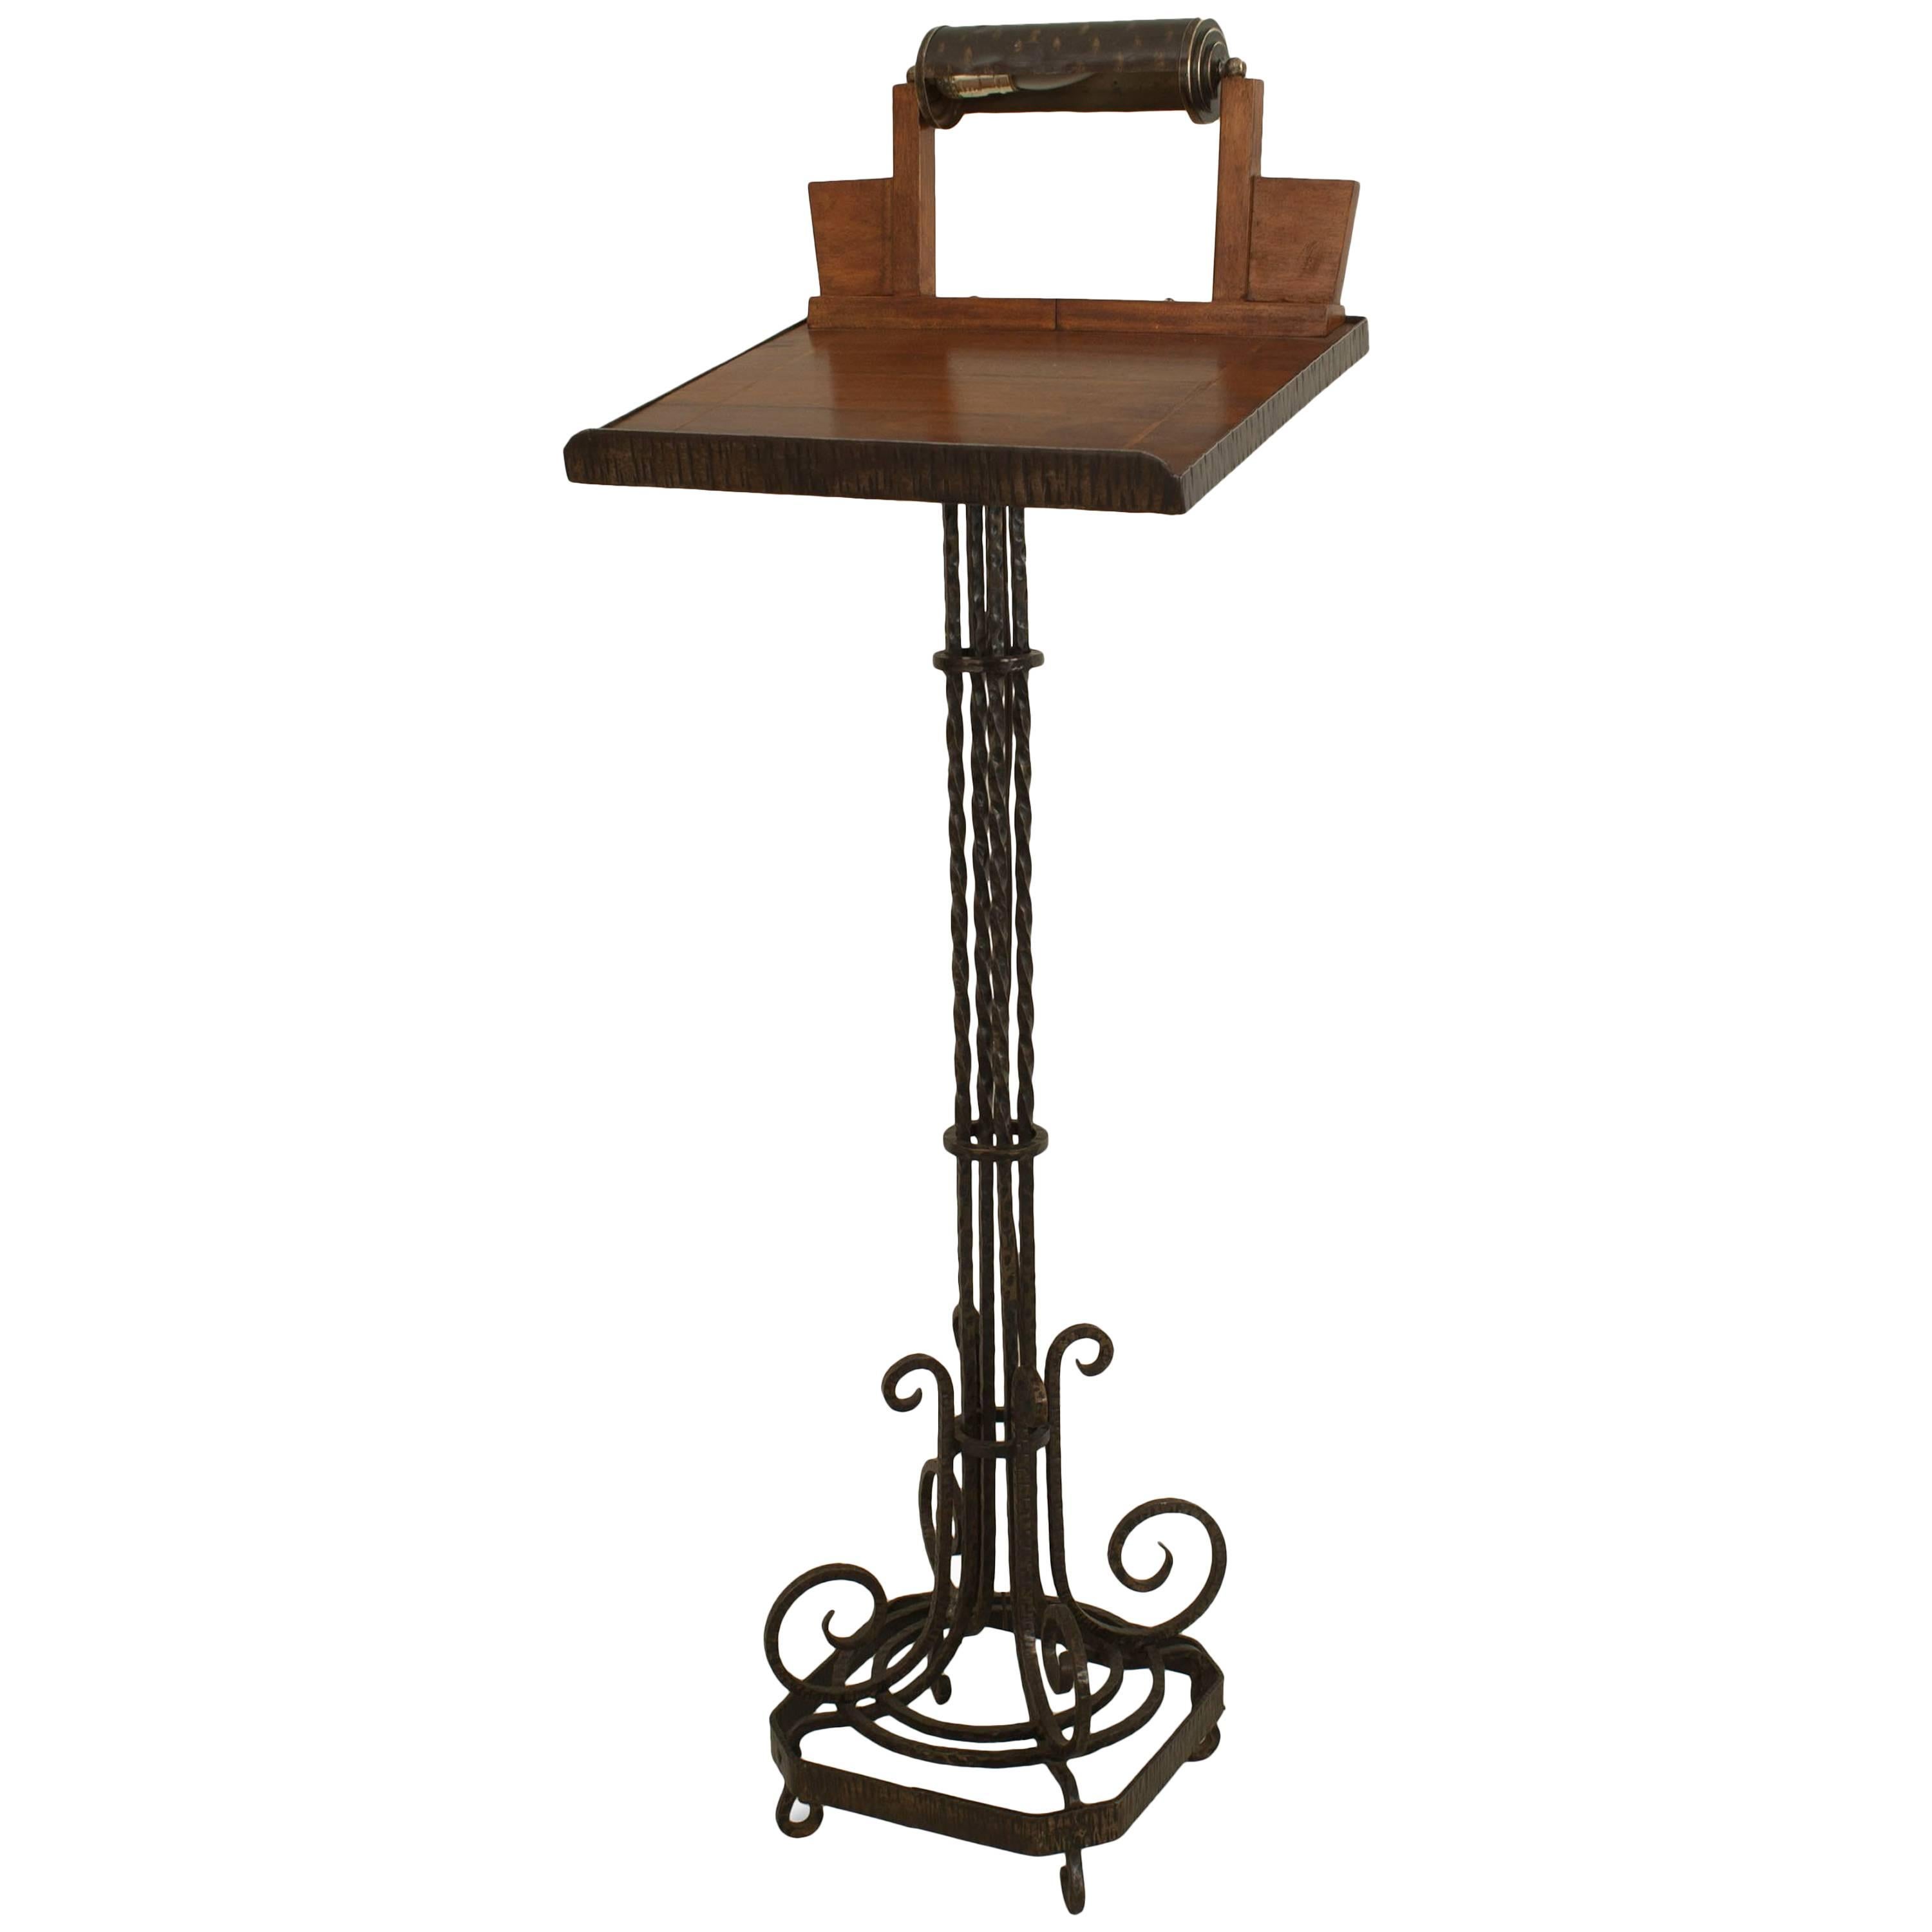 French Art Deco Wrought Iron Lectern